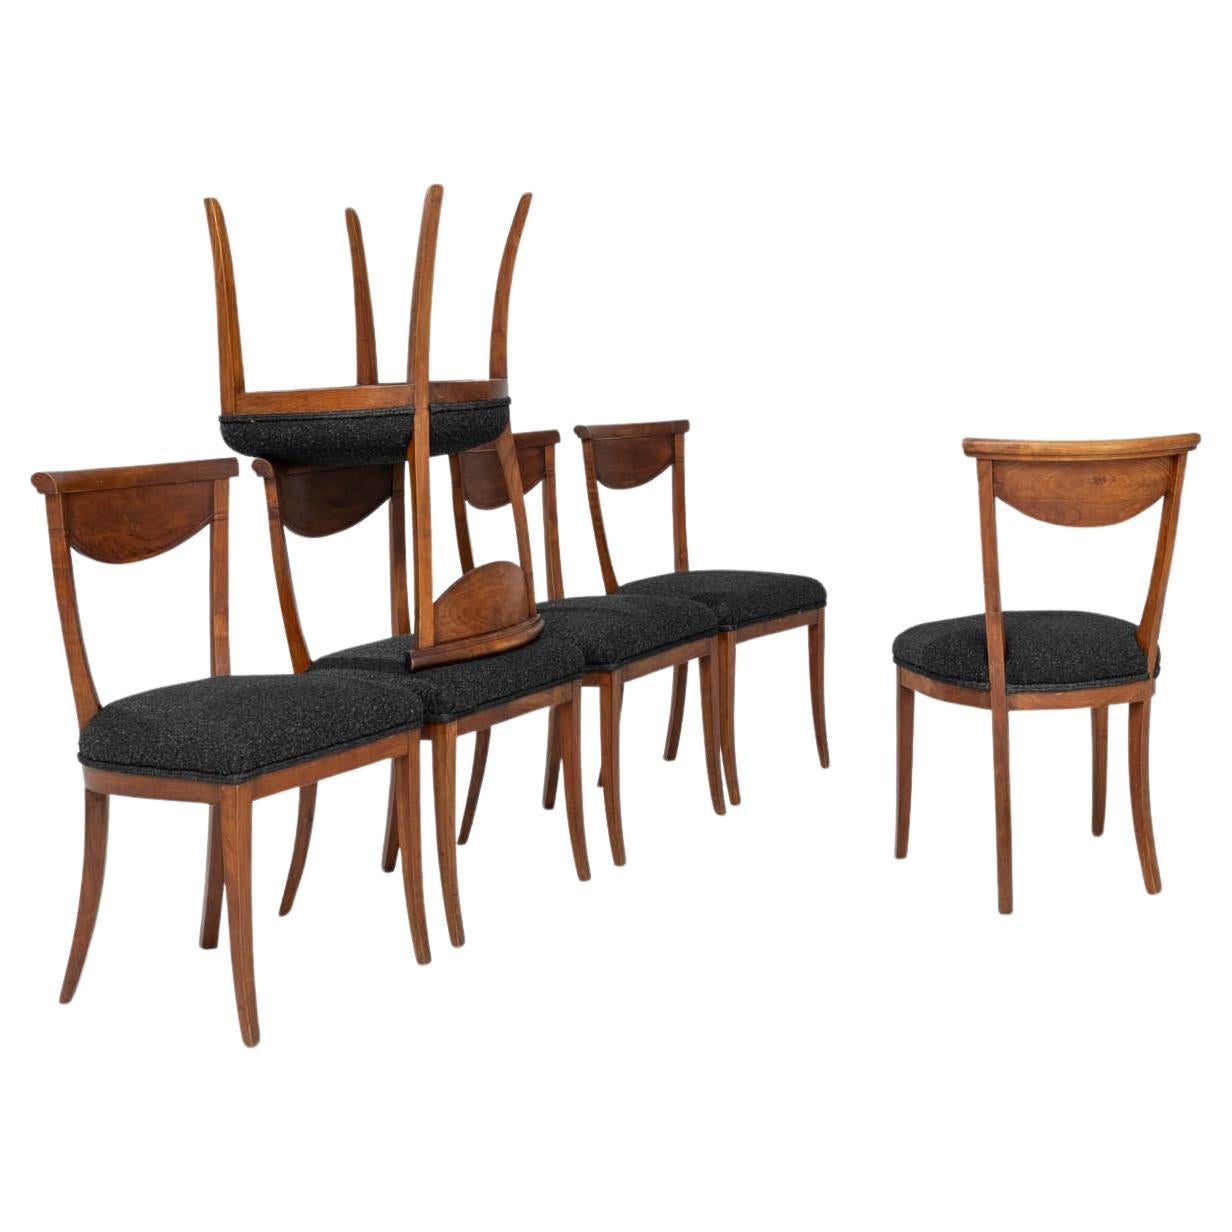 19th Century French Wooden Dining Chairs With Upholstered Seats, Set of 6 For Sale